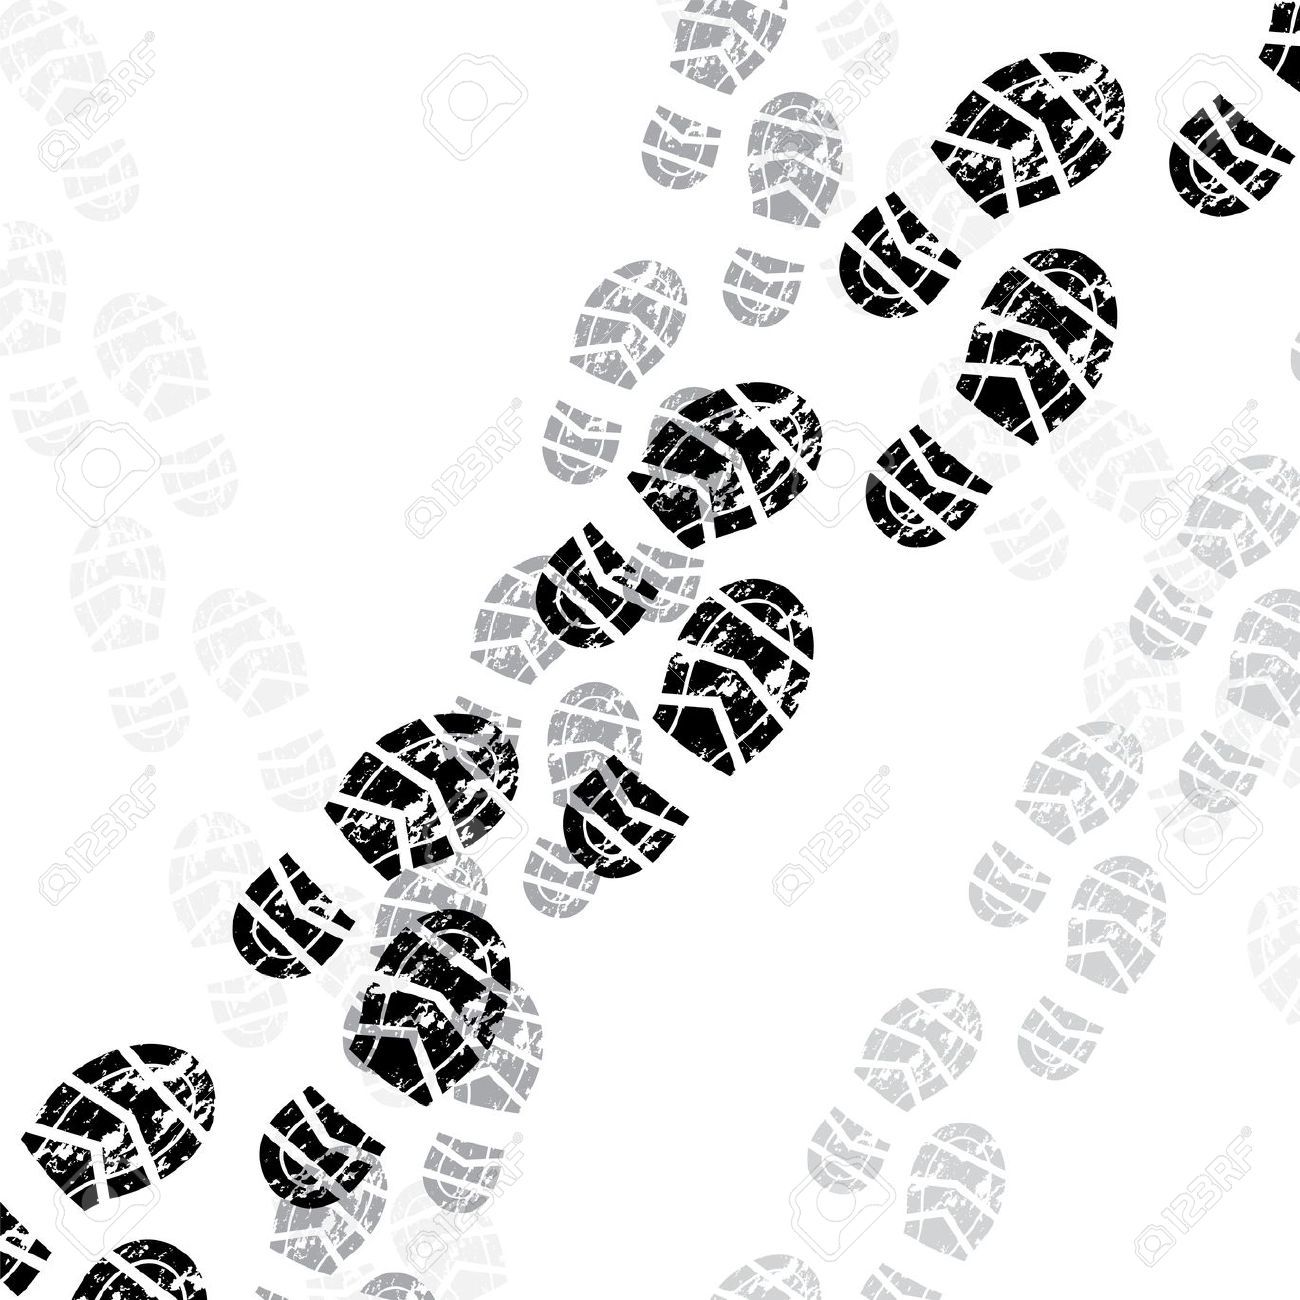 Footsteps clipart shoe soles. Running shoes cliparts stock